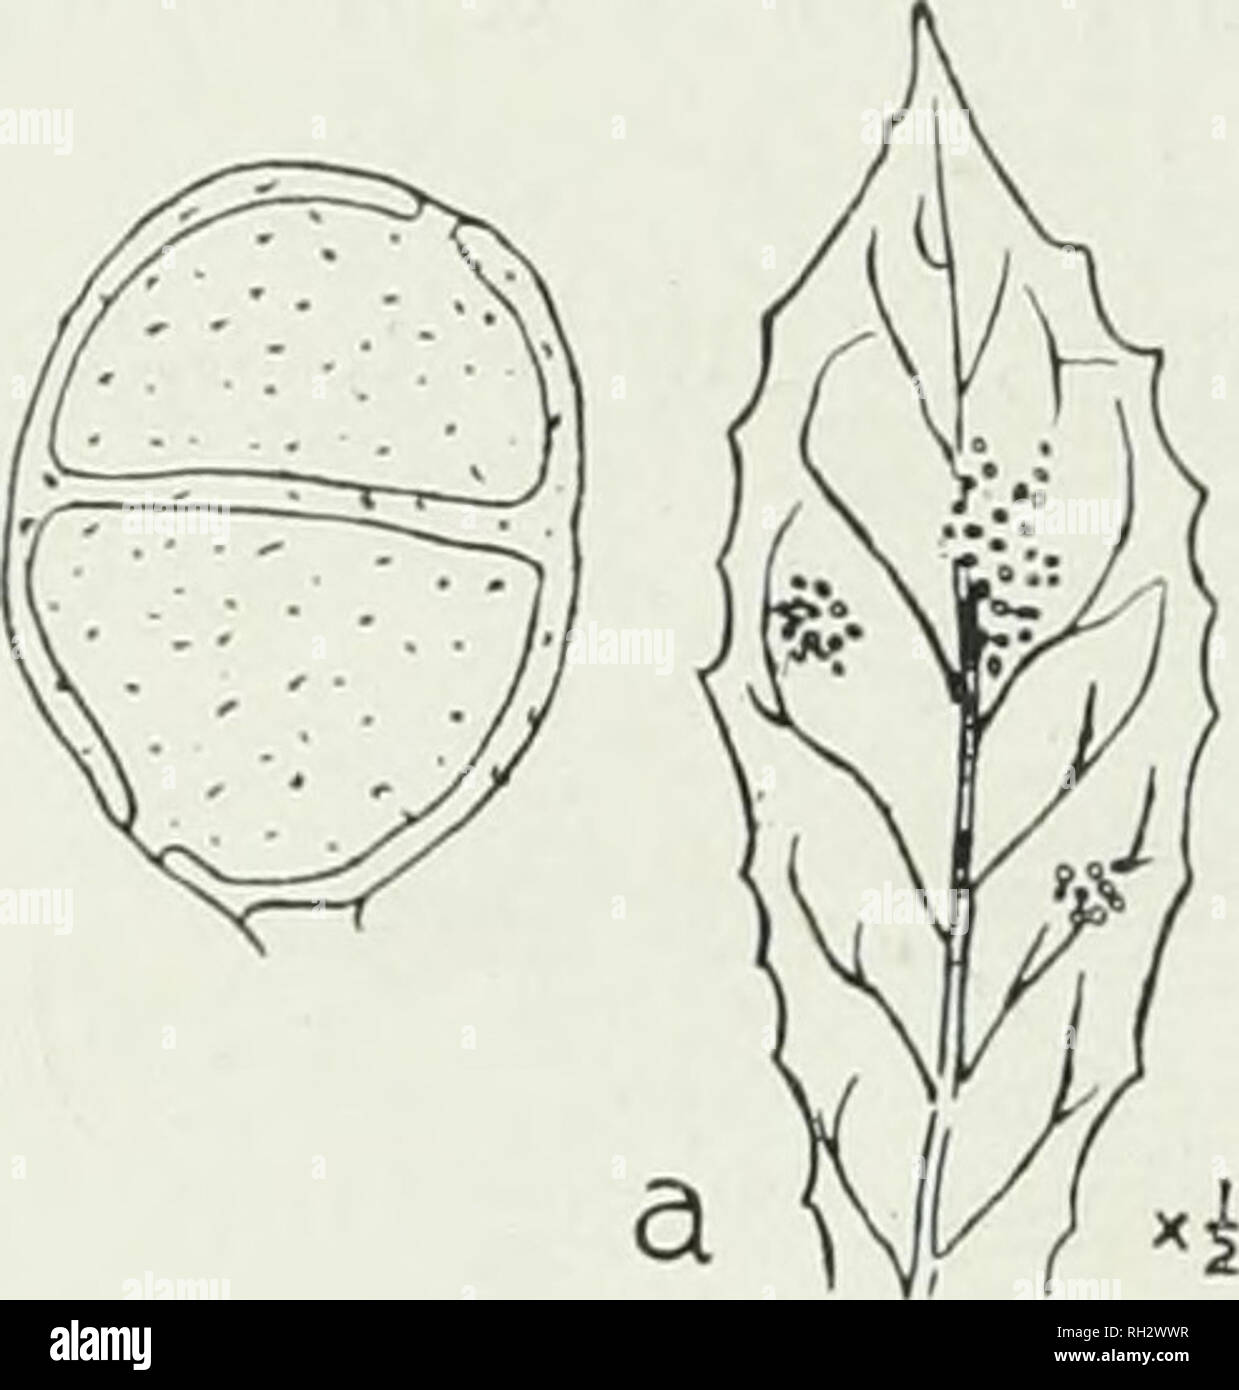 . The British rust fungi (Uredinales), their biology and classification. Uredineae. 158 PUCCINIA. Fig. 109. P. major. Te- leutospore, on C. palu- Uredospo7^es. Sori amphigenous, solitary, minute, cinnamon; spores subglobose to ovoid, distinctly echinulate, brownish, 24—30 x 21— 26yLt. Teleutospores. Sori chiefly hypo- phyllous, similar, but blackish-brown, standing singly, scattered over nearly the whole leaf-surface; spores ellipsoid to ovoid, rounded at both ends, not thickened above, hardly constricted, very delicately verruculose, chestnut- rfosrt ; a, ascidia on leaf of i oo ,io .. oo on  Stock Photo